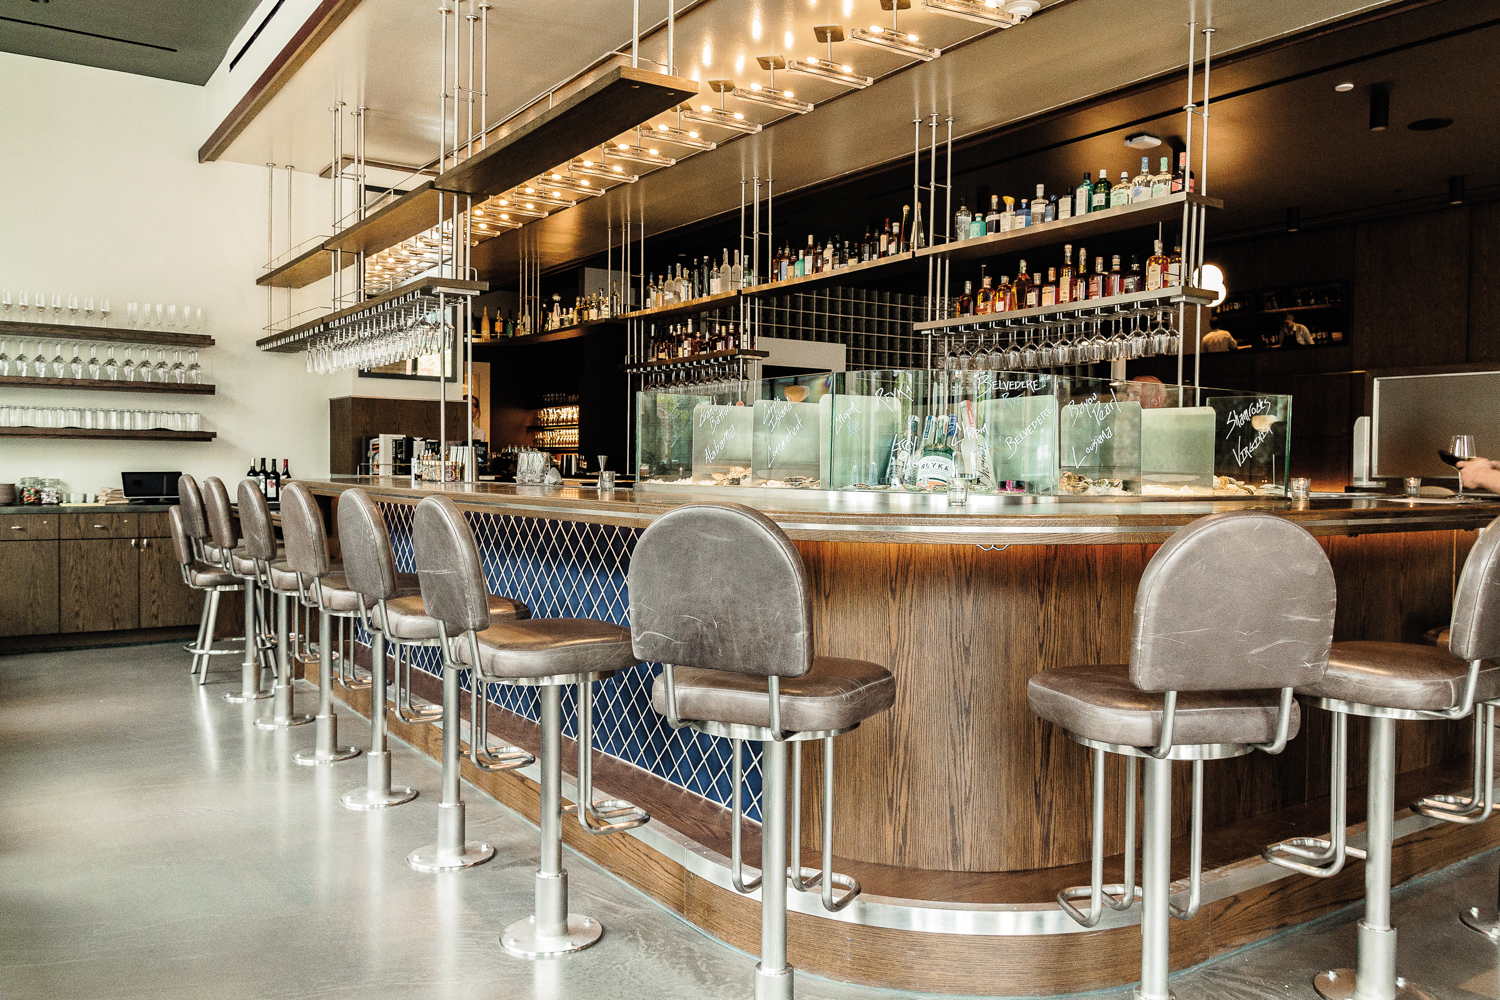 Swivel bar stools line a curved restaurant bar with blue tile in diamond-shaped pattern alongside the front 